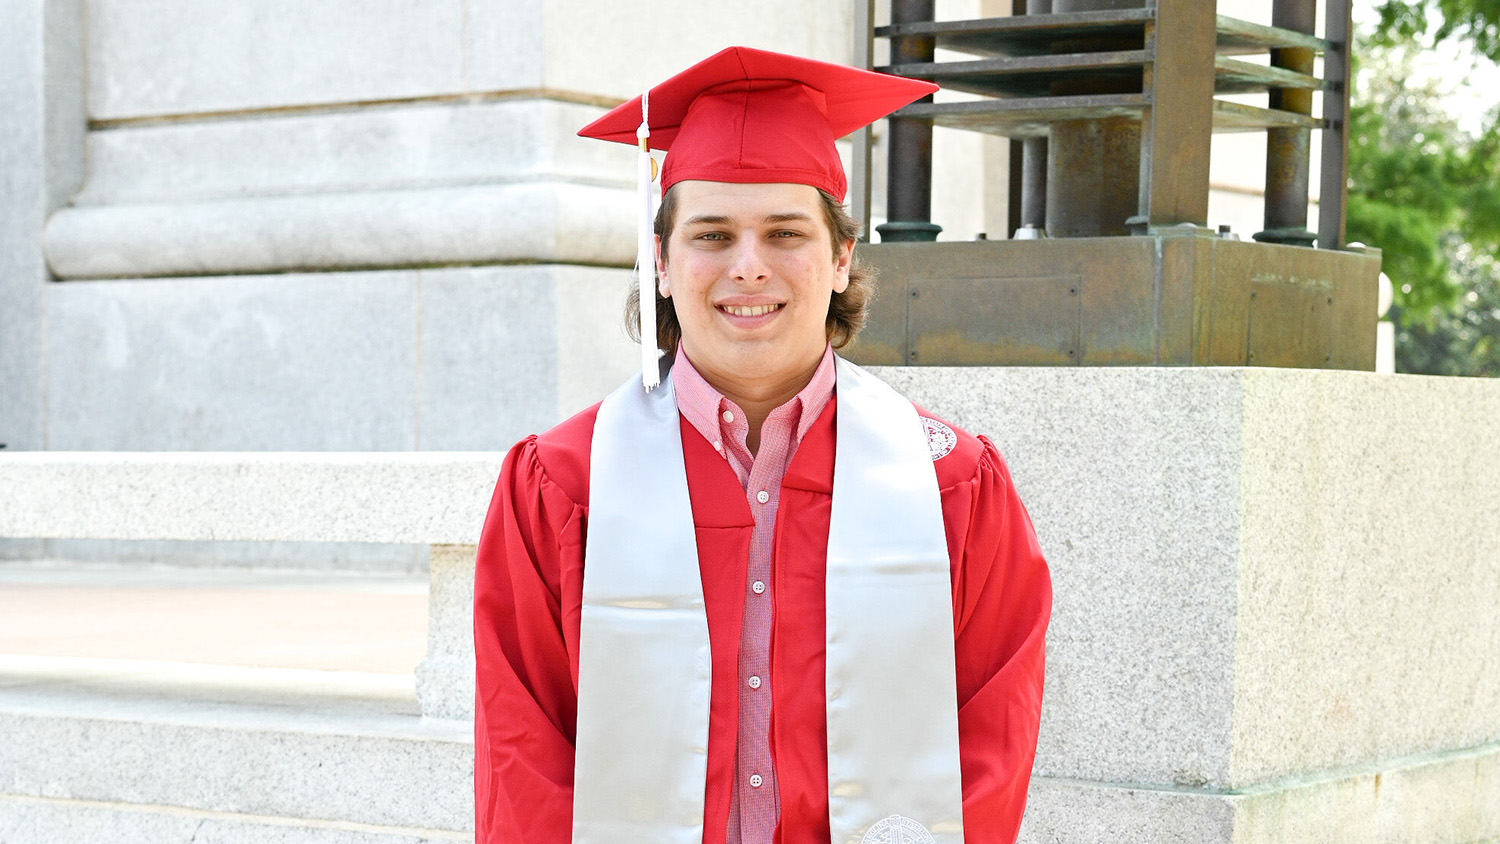 A student in his cap and gown stands in front of a concrete building.